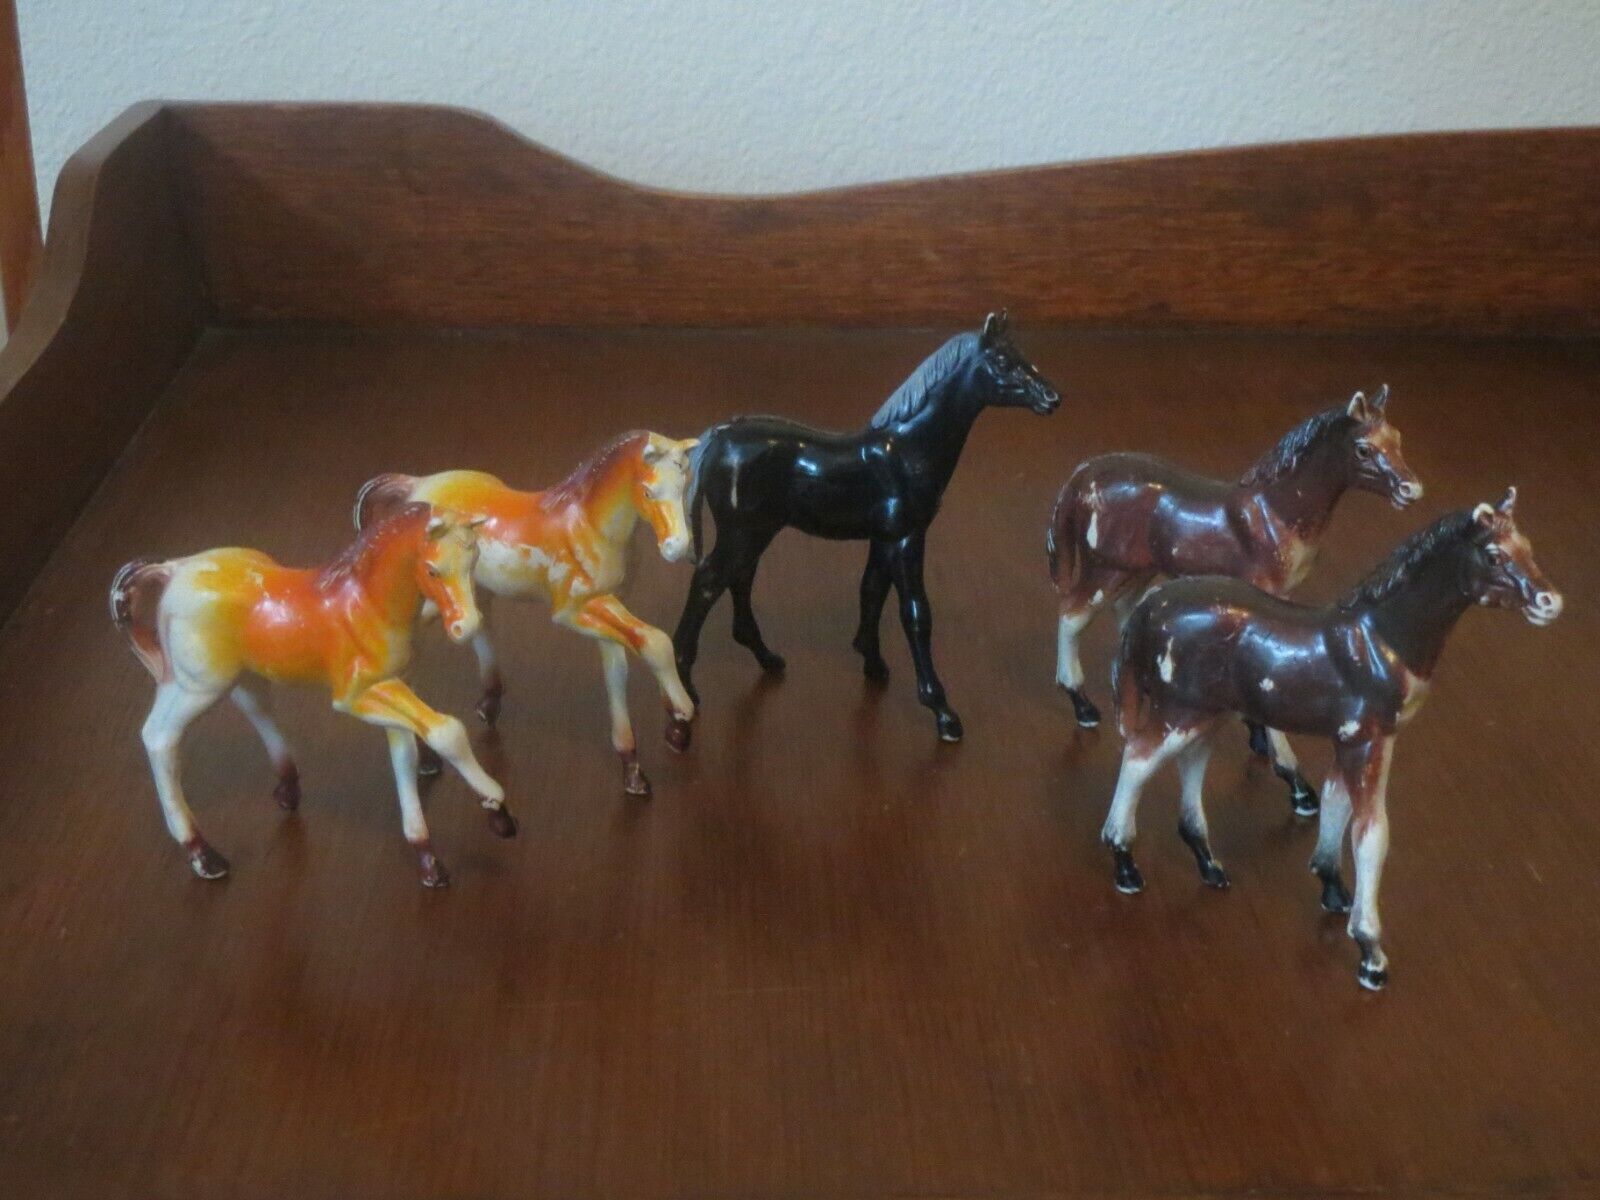 Vintage Imperial Toys Hong Kong 1970s Plastic Toy Horse Lot of 5 